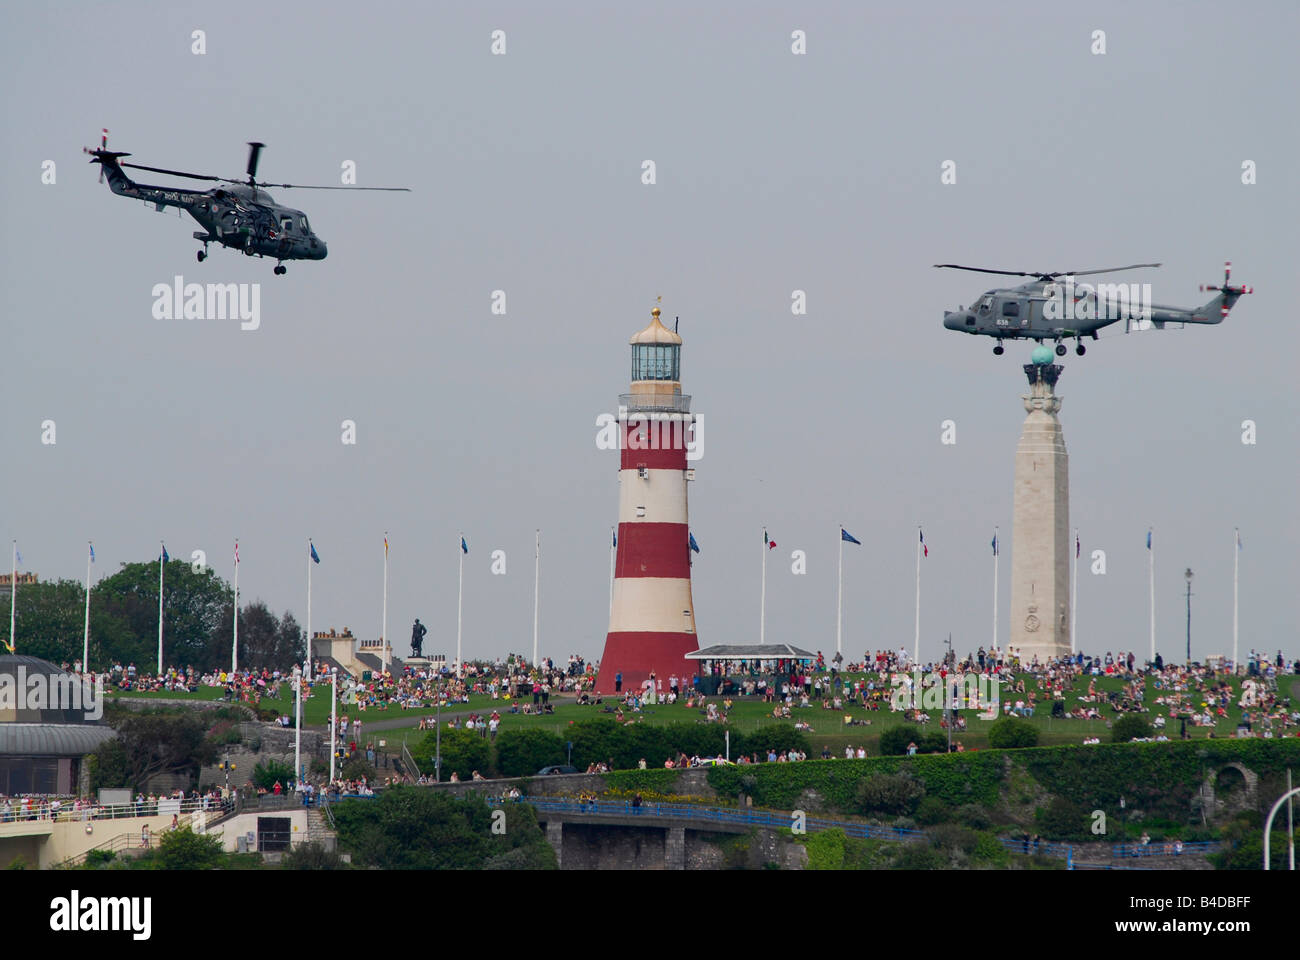 Two Royal Navy helicopters above Smeaton's Tower (lighthouse) on Plymouth Hoe, UK, with crowds of people (2008 Transat Race) Stock Photo